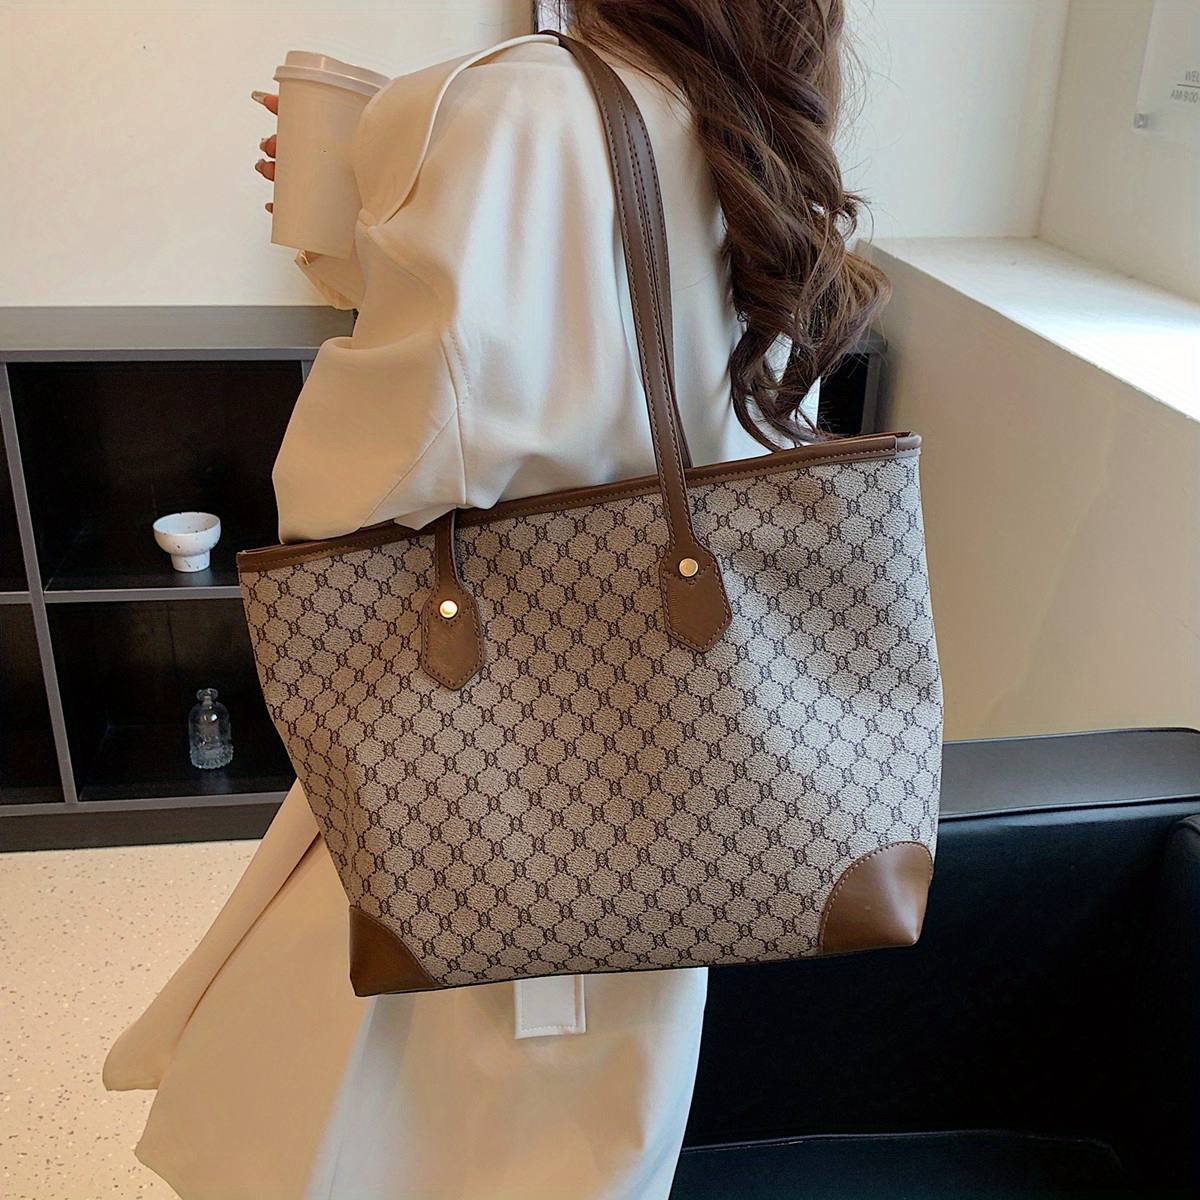 Gucci Beige Soft GG Supreme Canvas and Leather Butterfly Tote Gucci